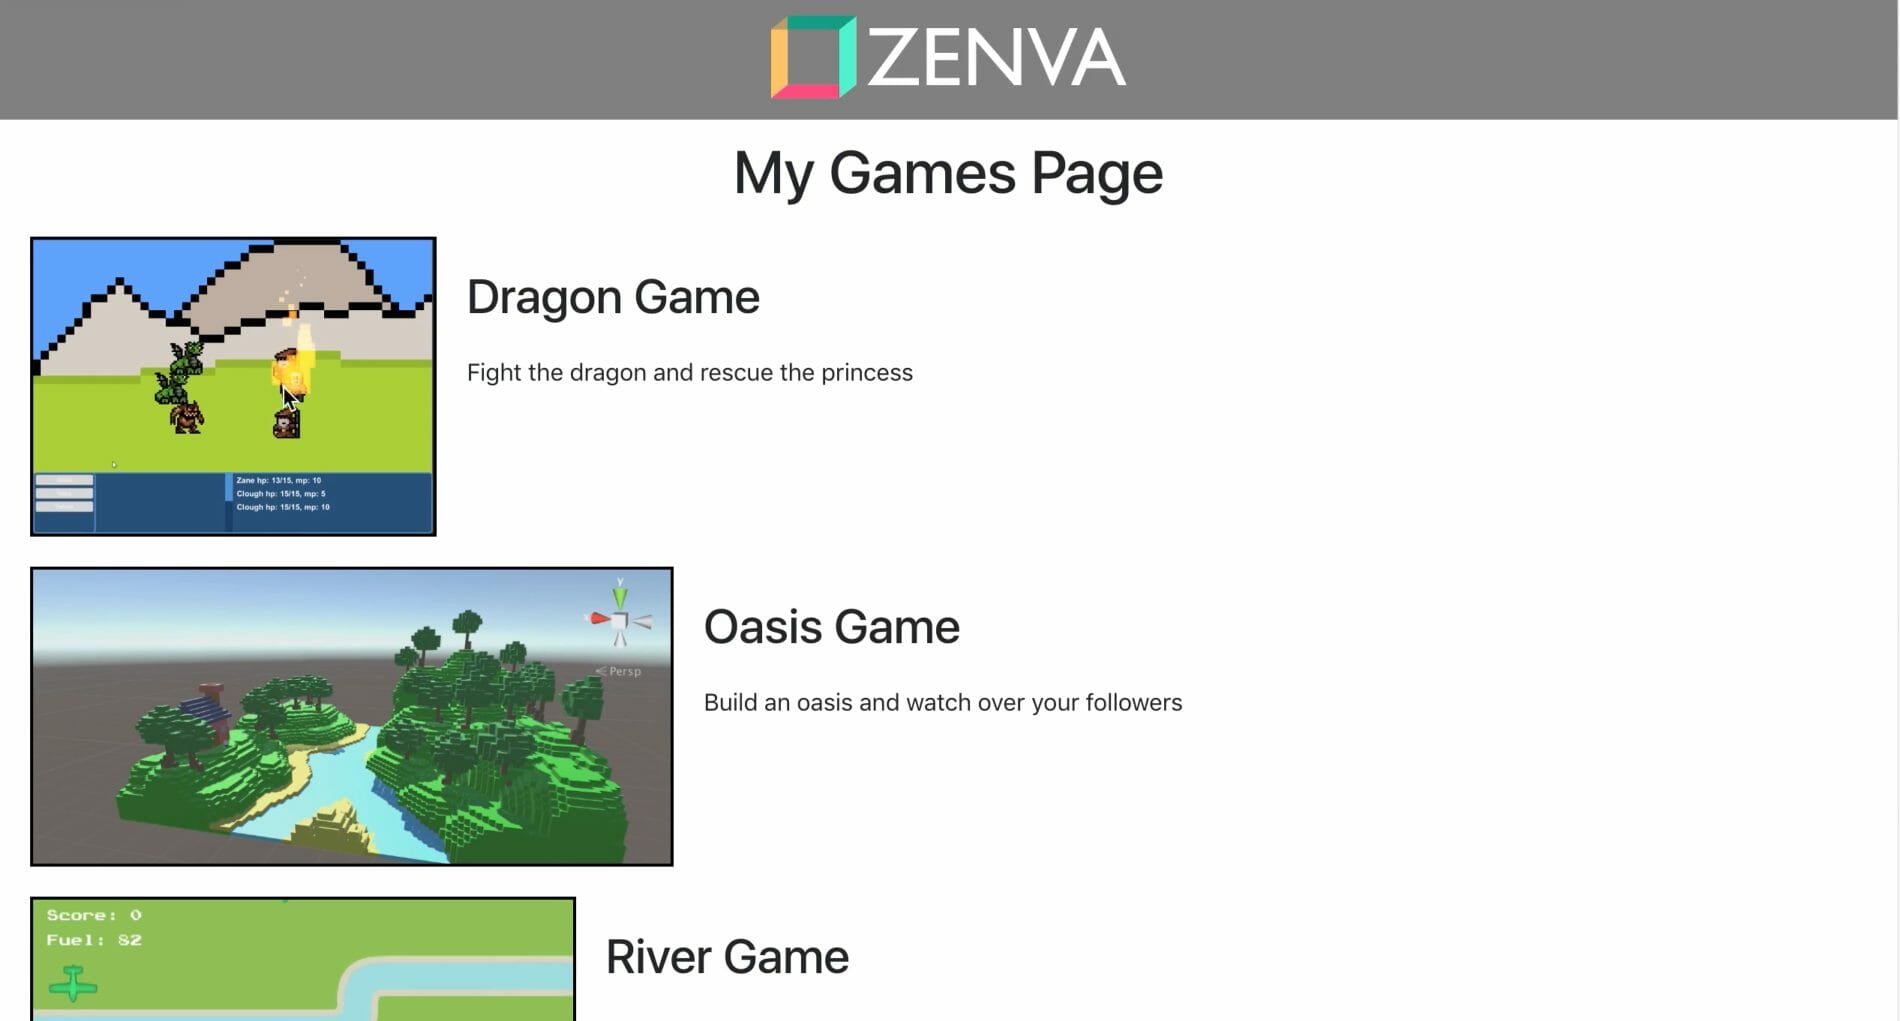 Static web page example for a games website